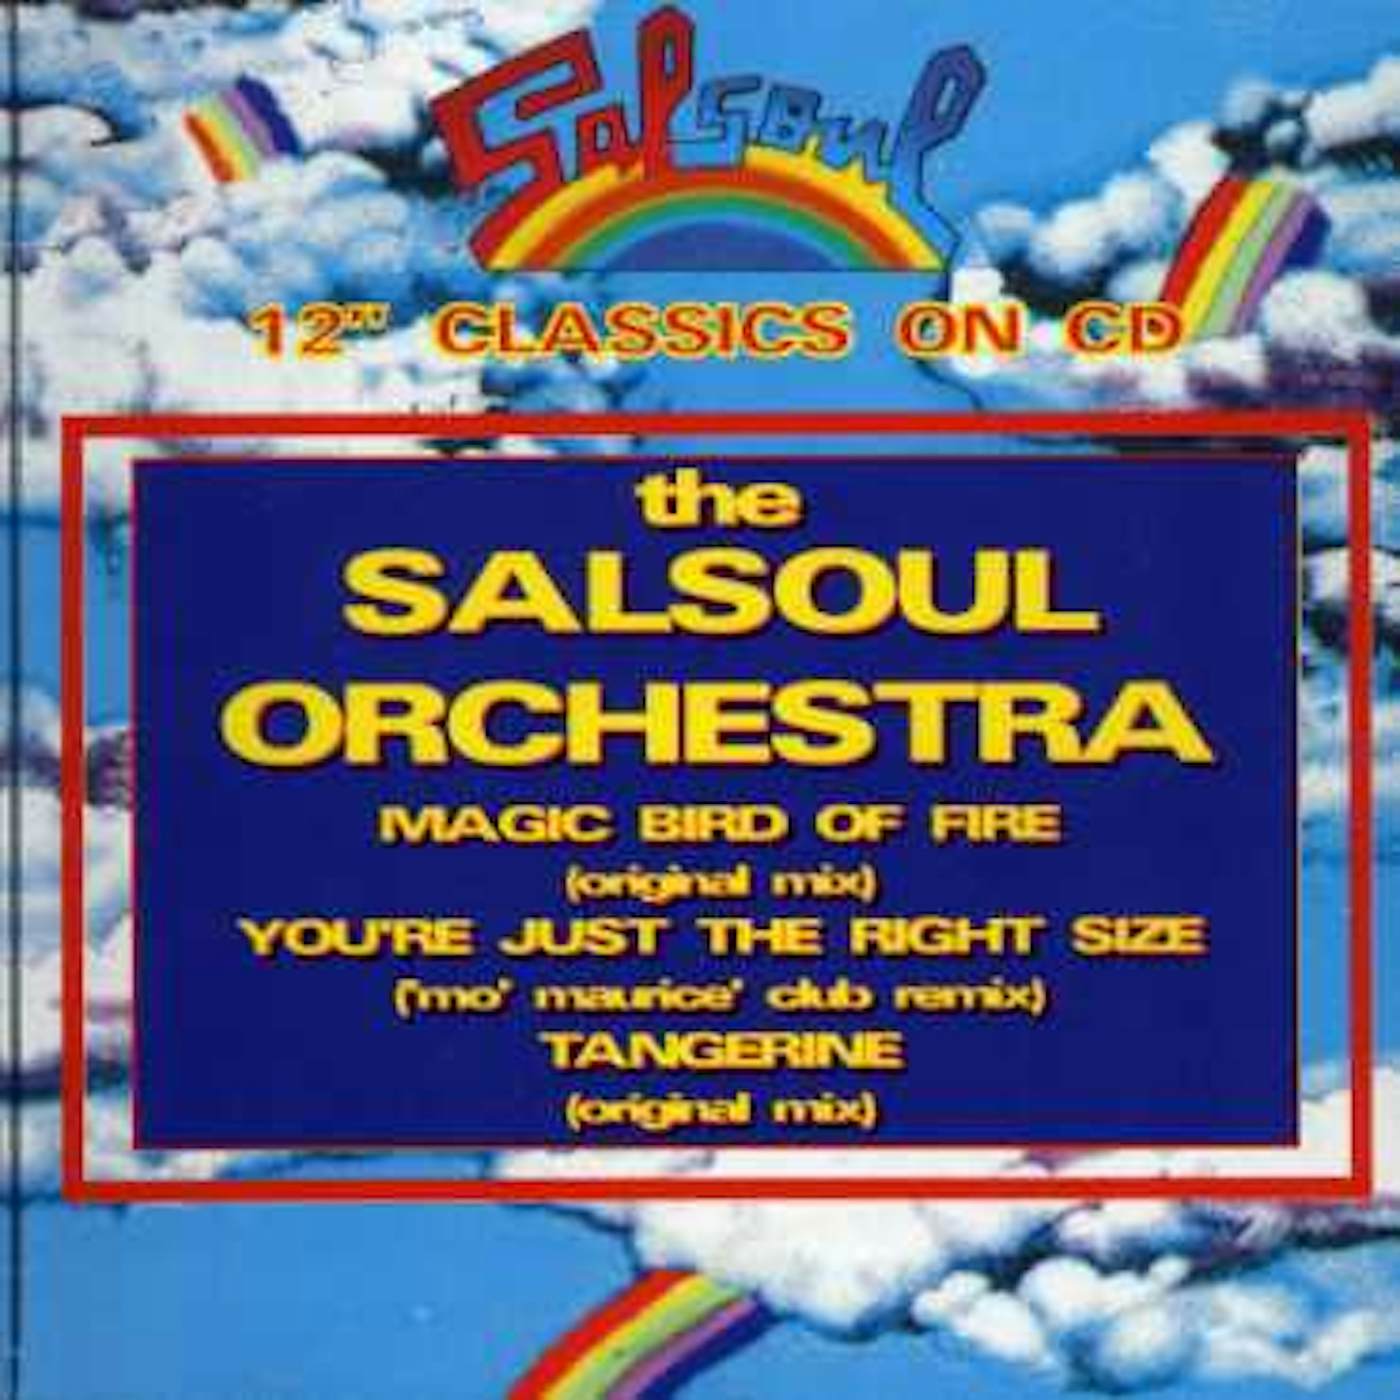 The Salsoul Orchestra MAGIC BIRD OF FIRE/YOURE JUST THE RIGHT CD